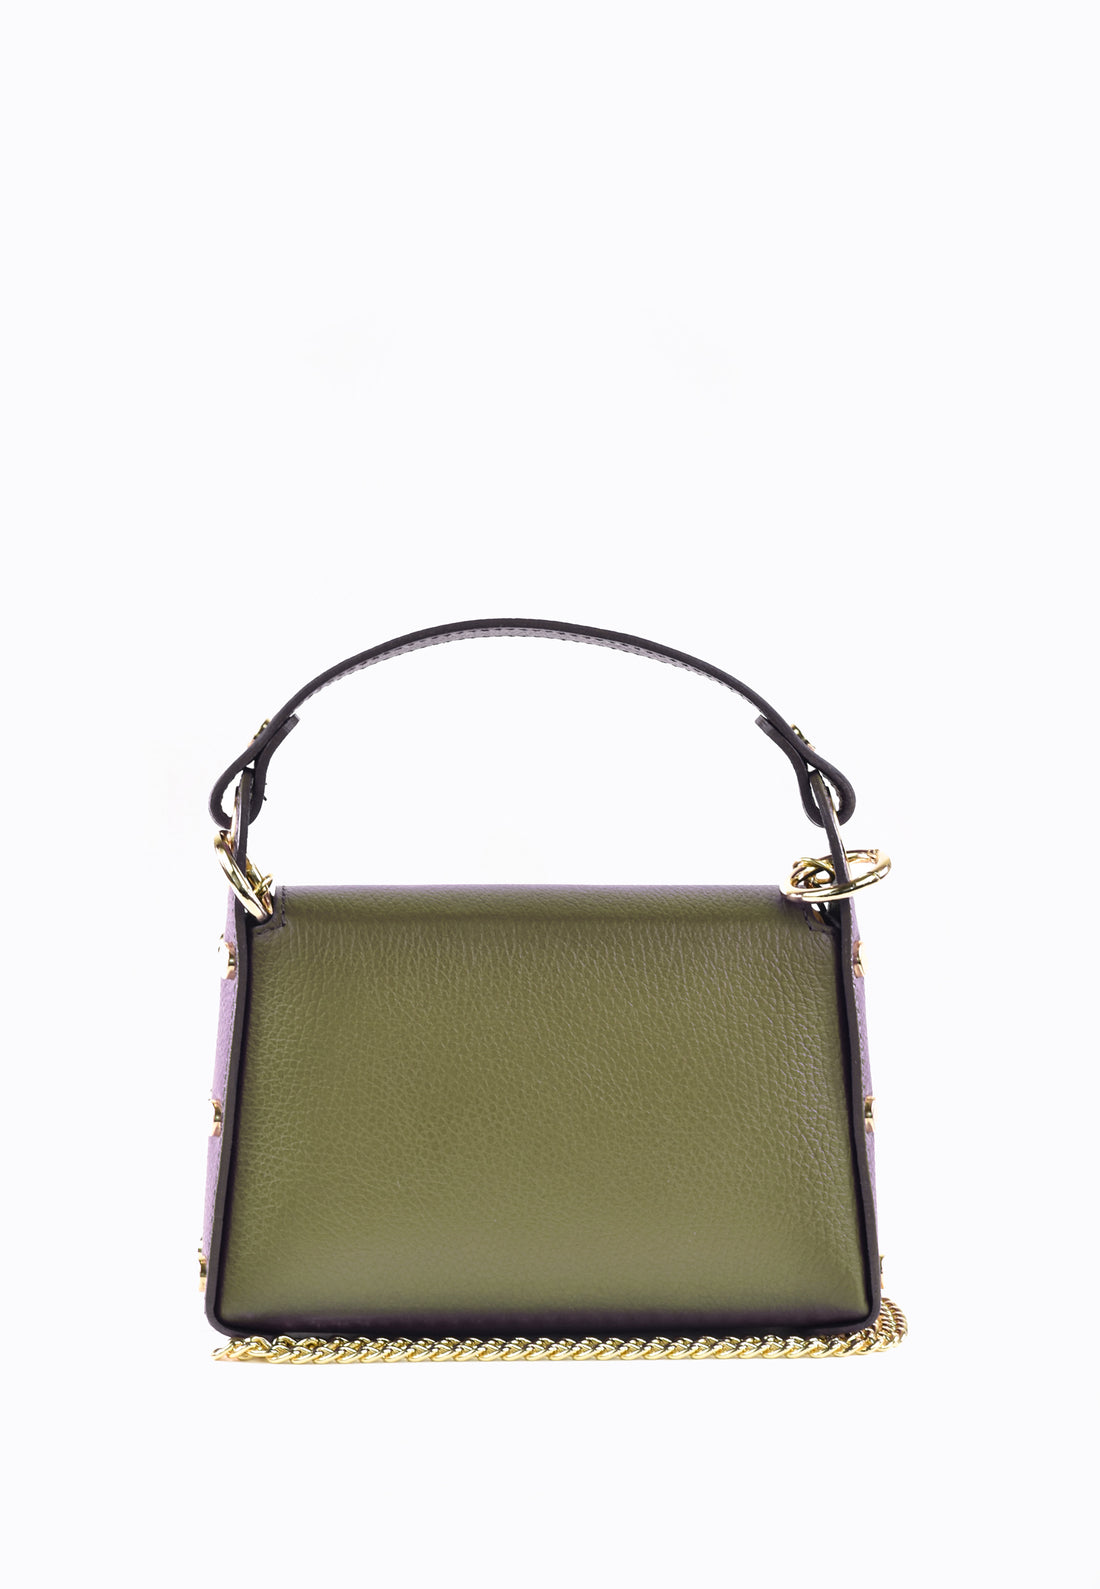 Honey bag in olive green dollar leather